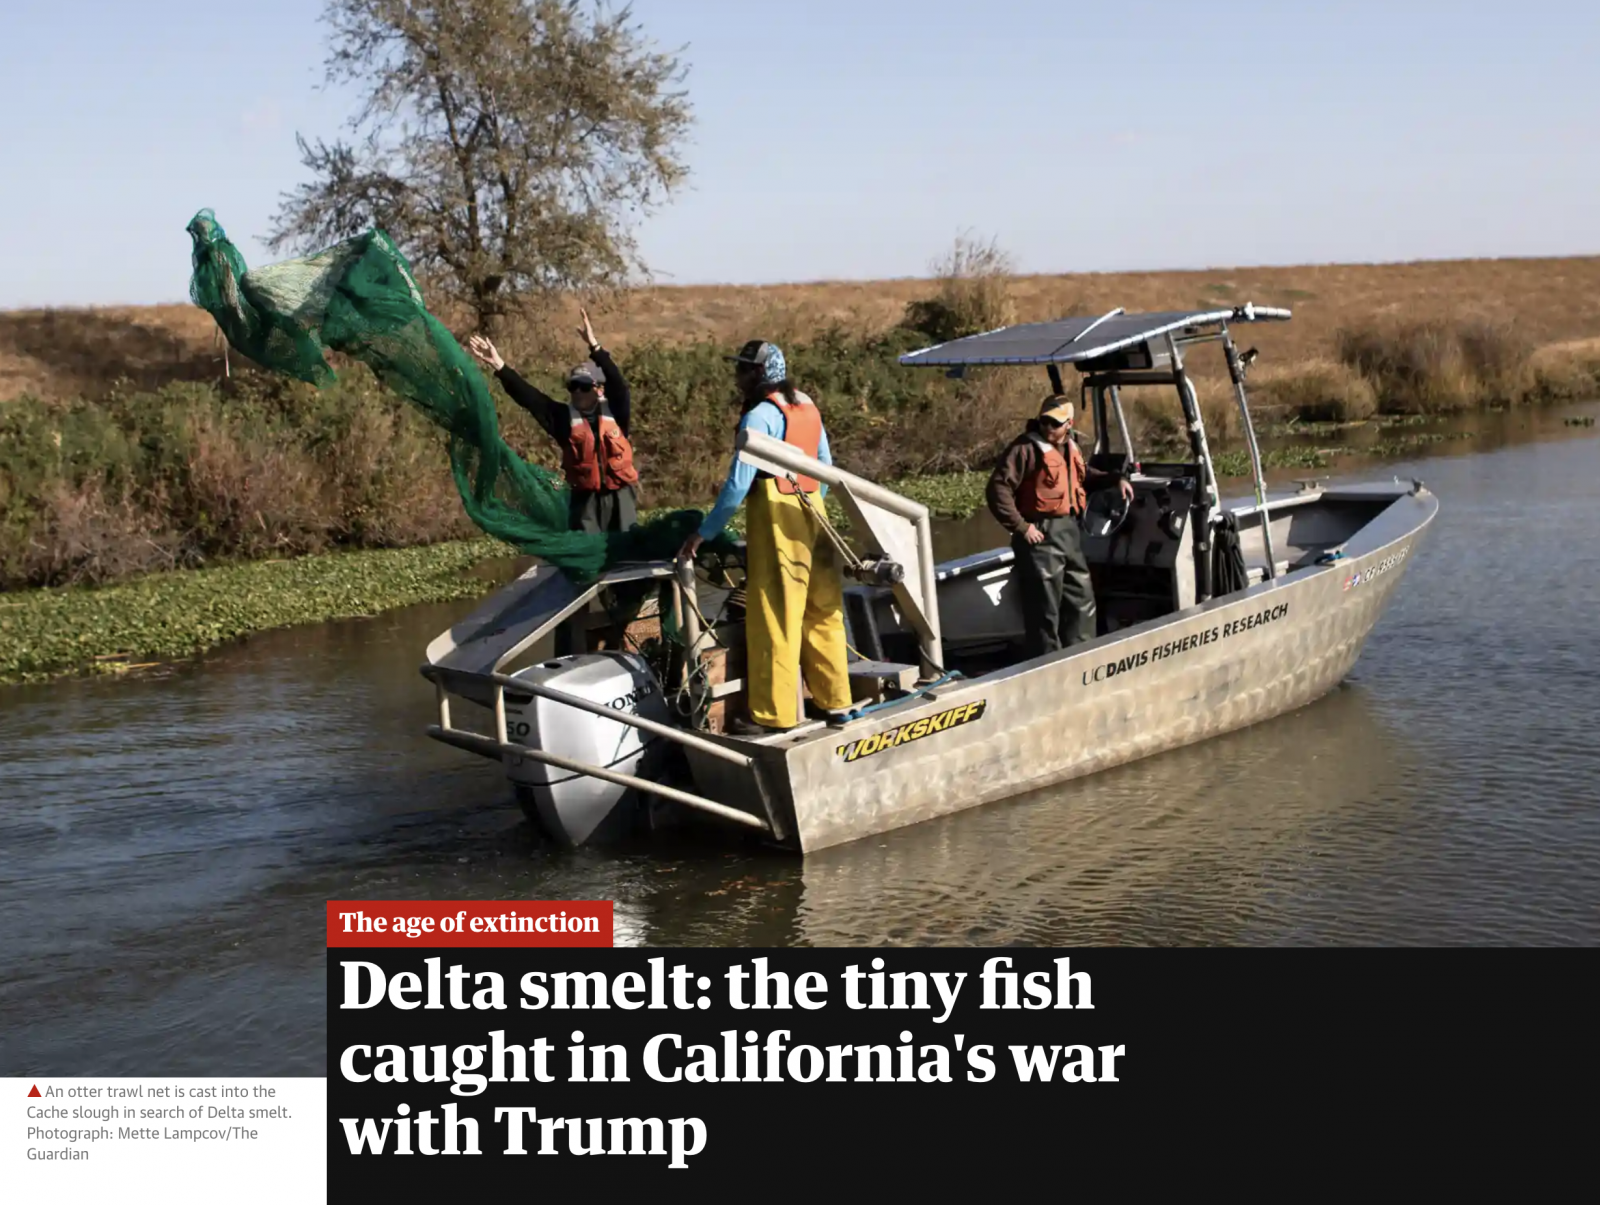 Delta smelt: the tiny fish caught in California's war with Trump